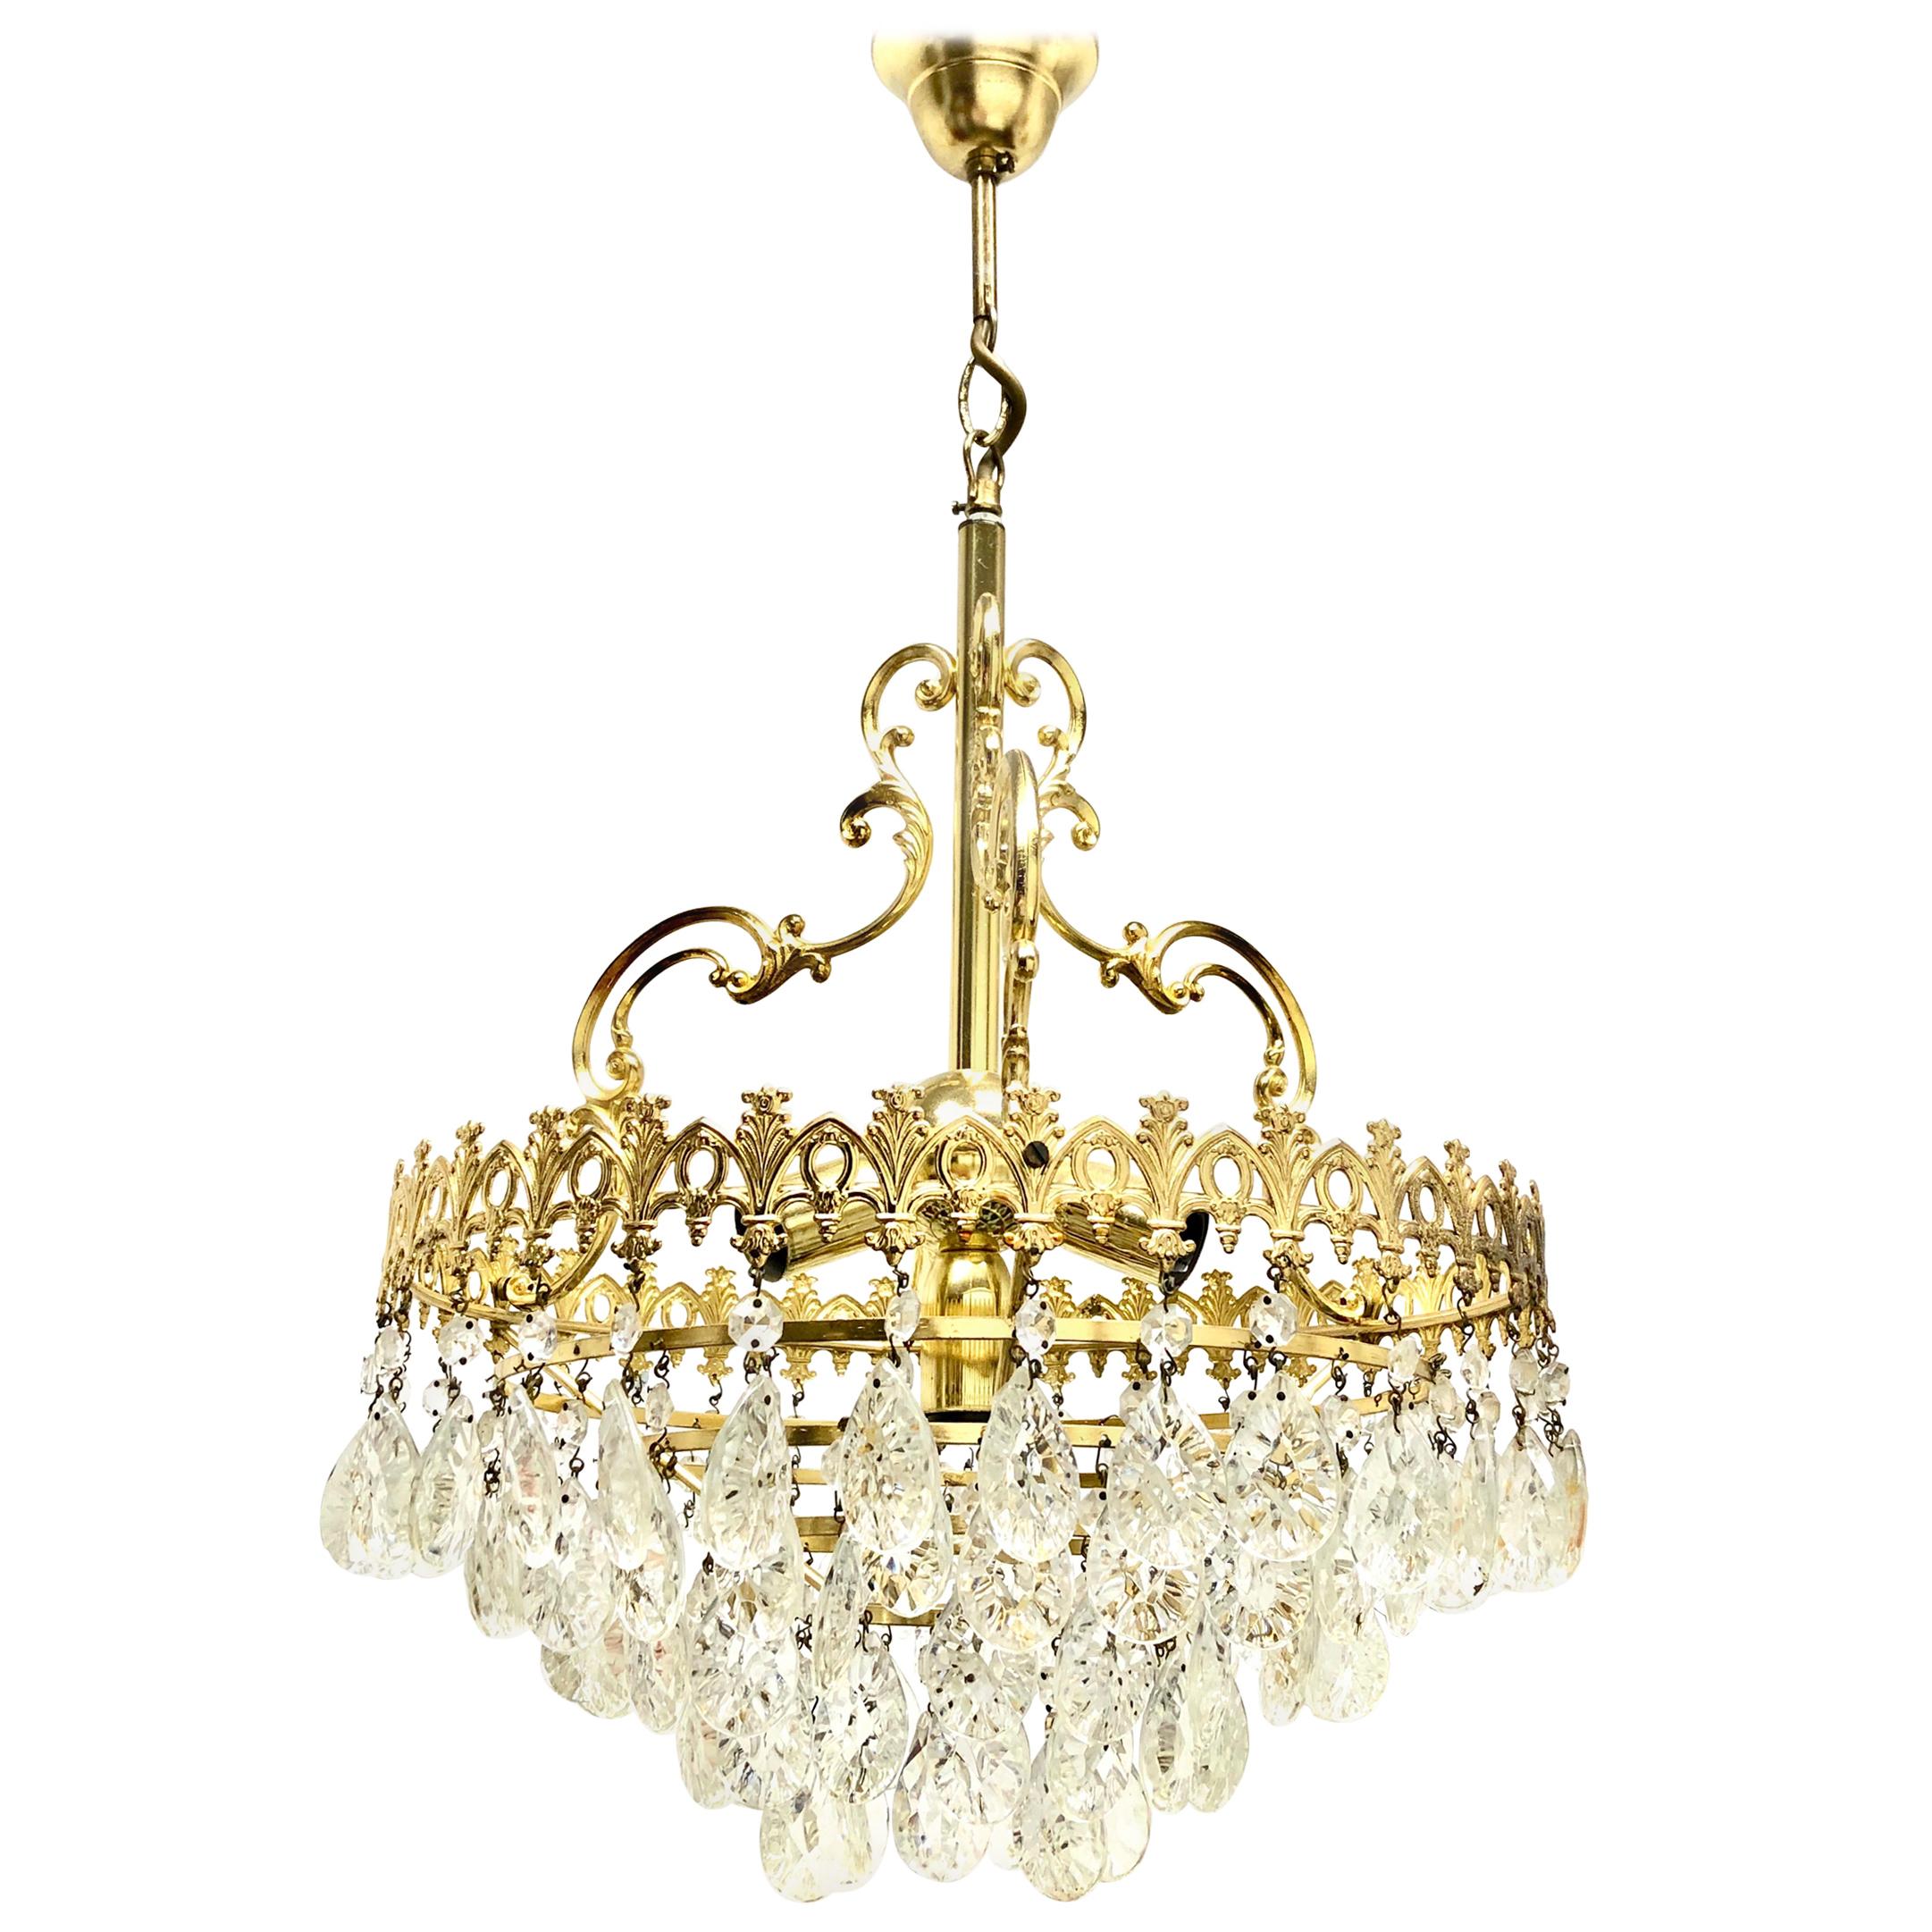 Brass and Crystal Glass Hollywood Regency Style Chandelier, Germany, 1960s For Sale